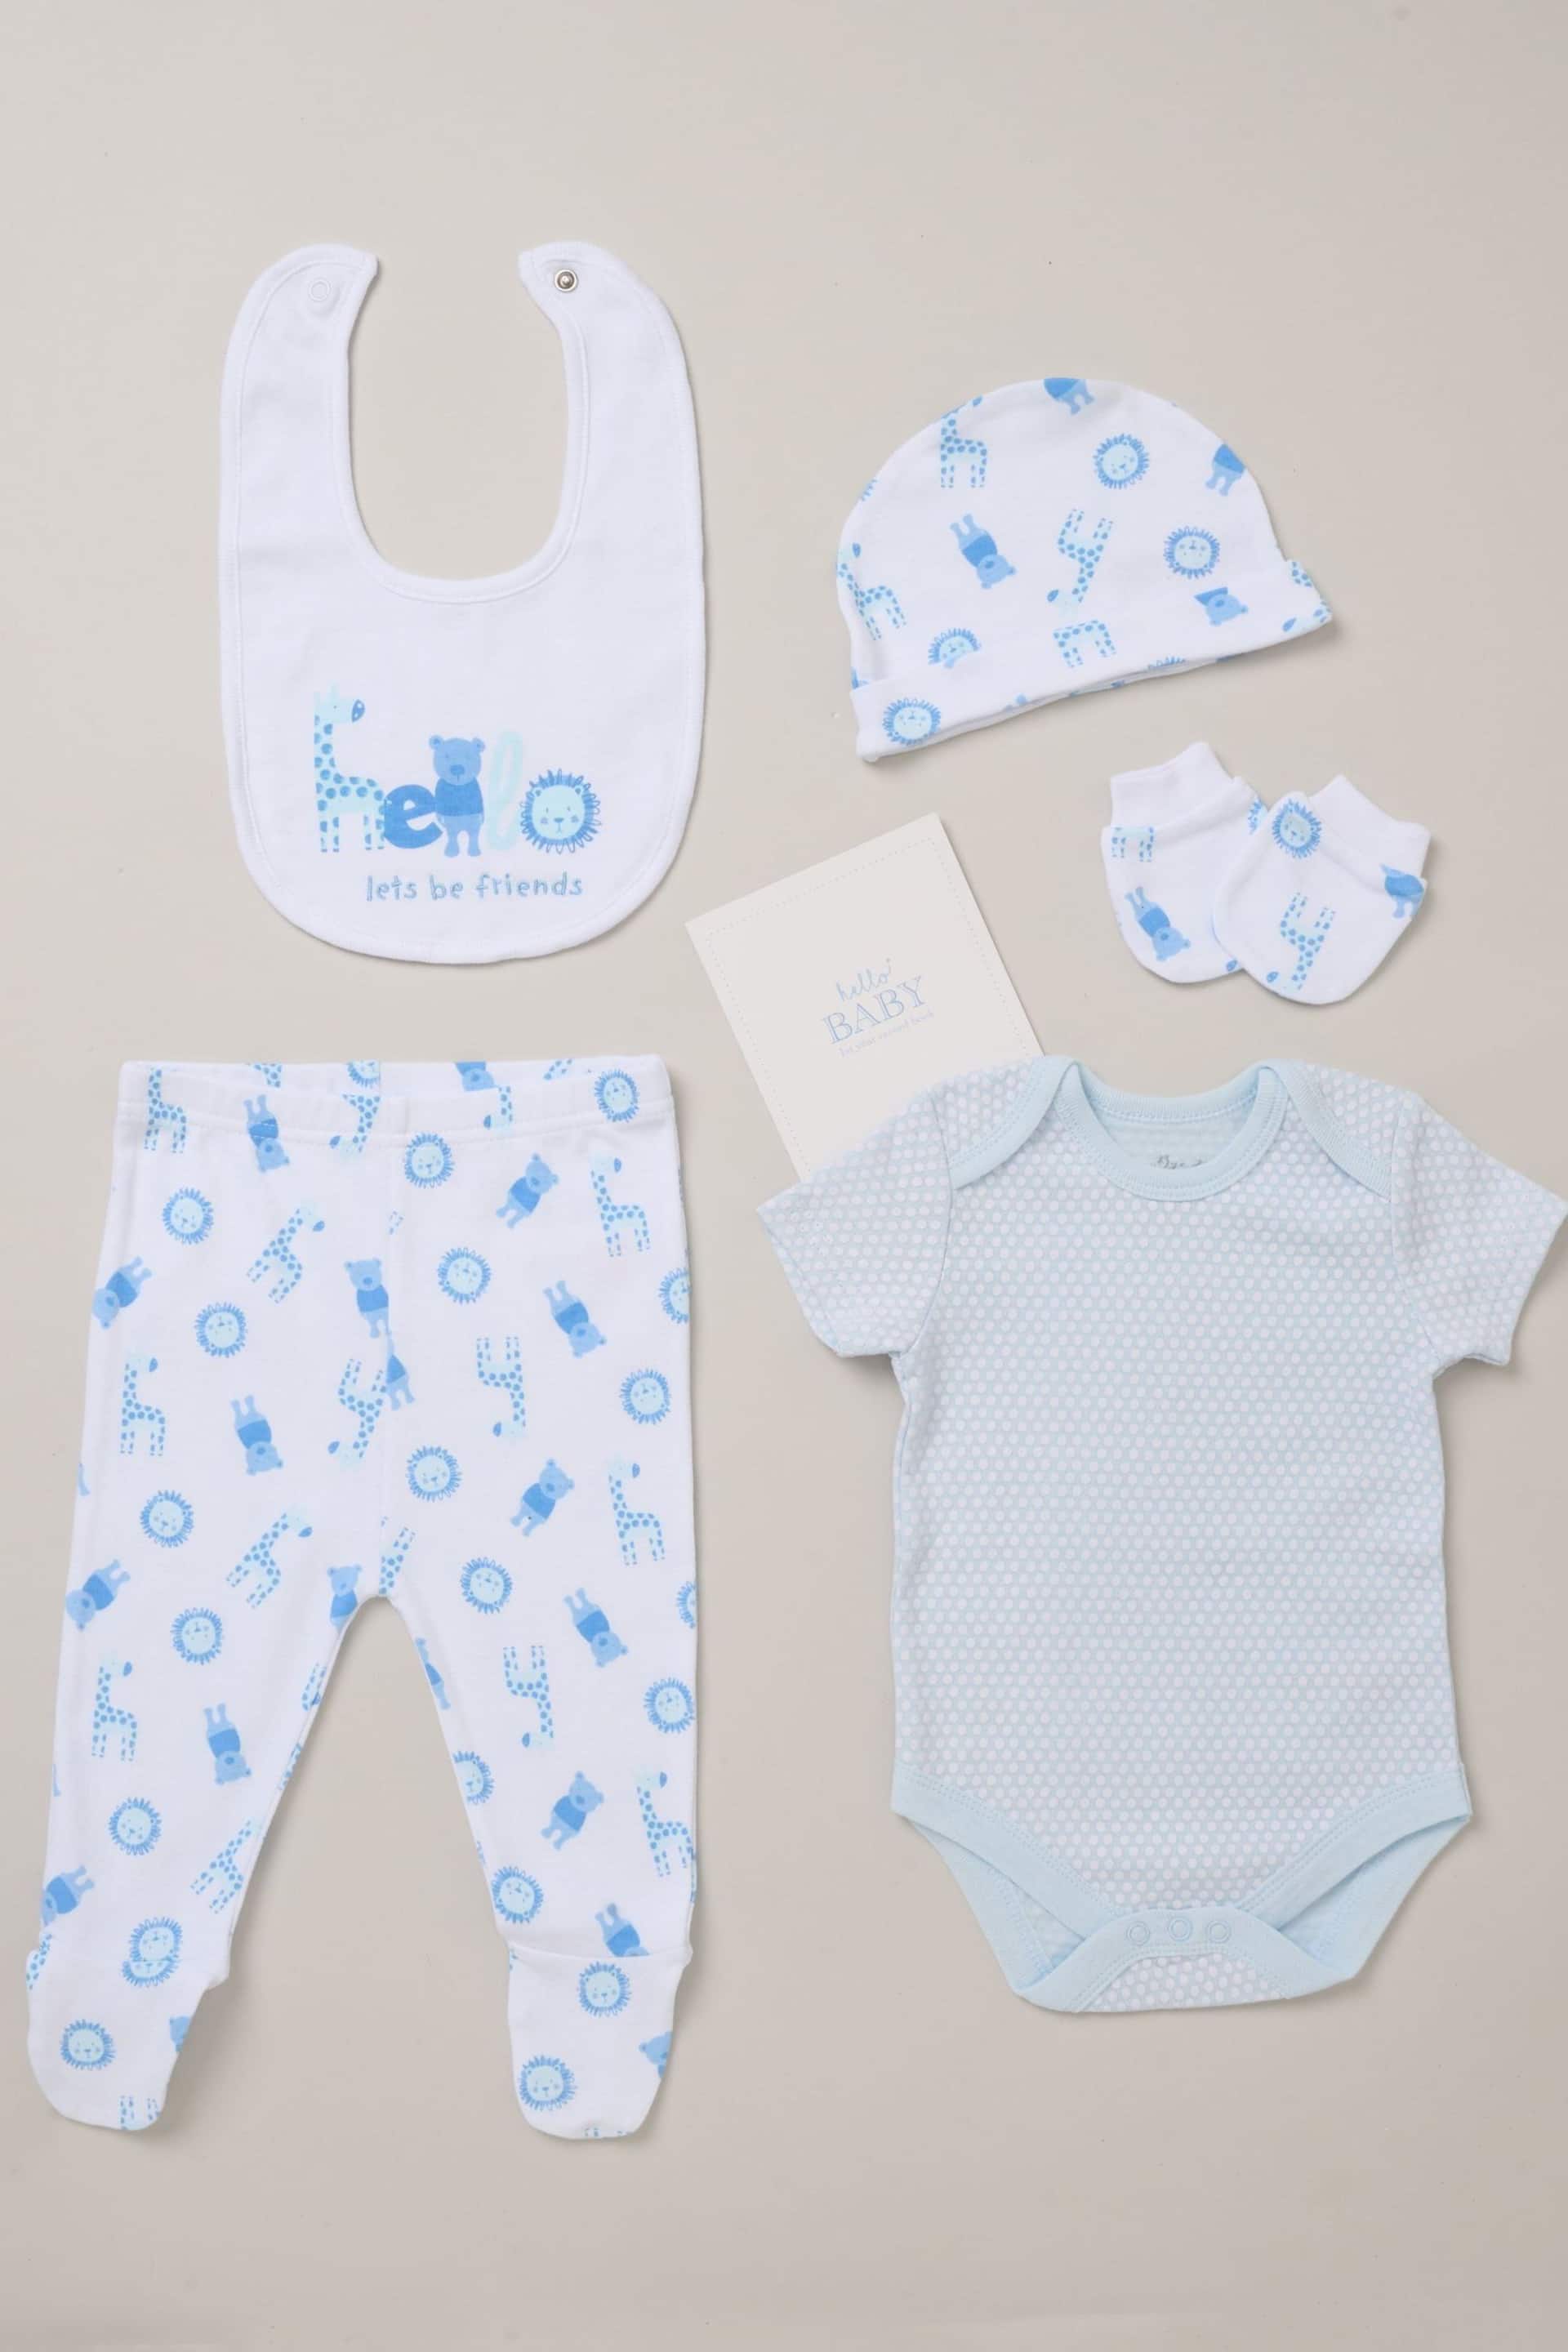 Rock-A-Bye Baby Boutique Blue Animal Print Cotton 6-Piece Baby Gift Set - Image 1 of 5